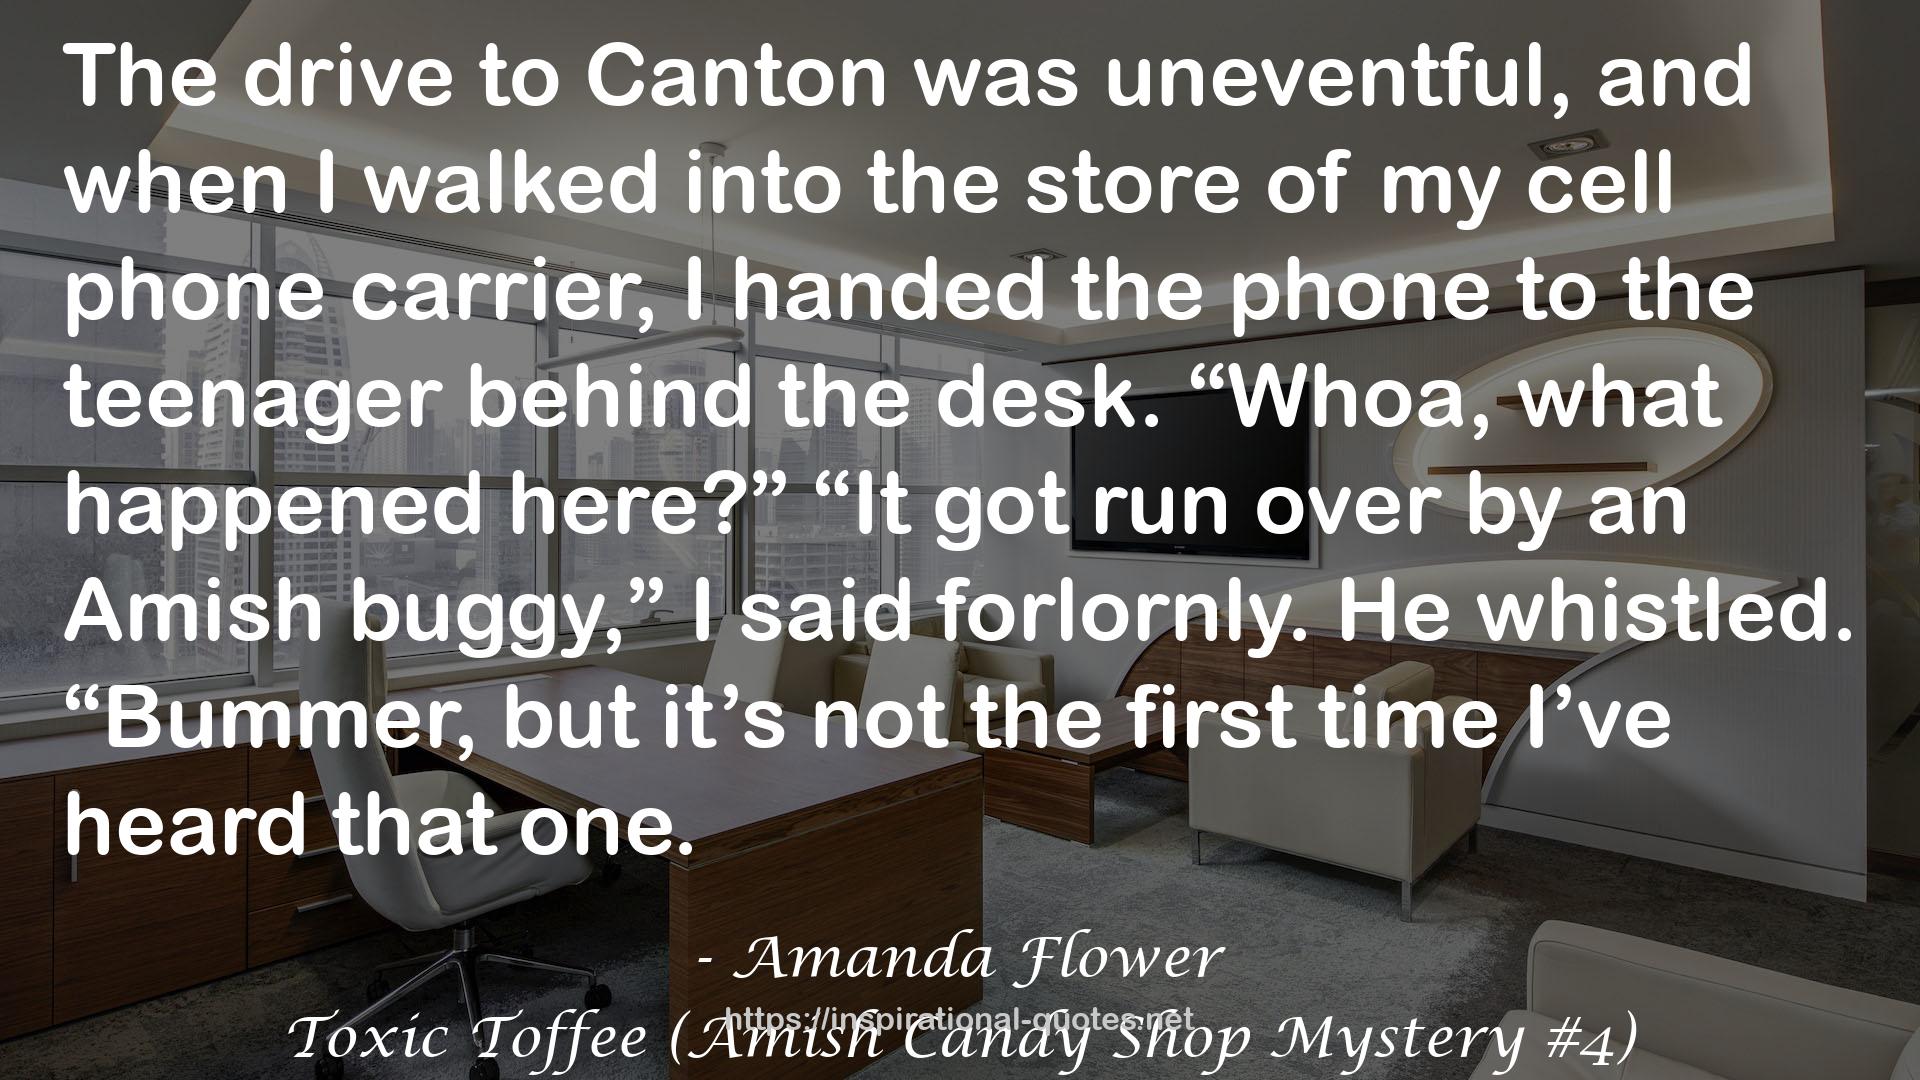 Toxic Toffee (Amish Candy Shop Mystery #4) QUOTES